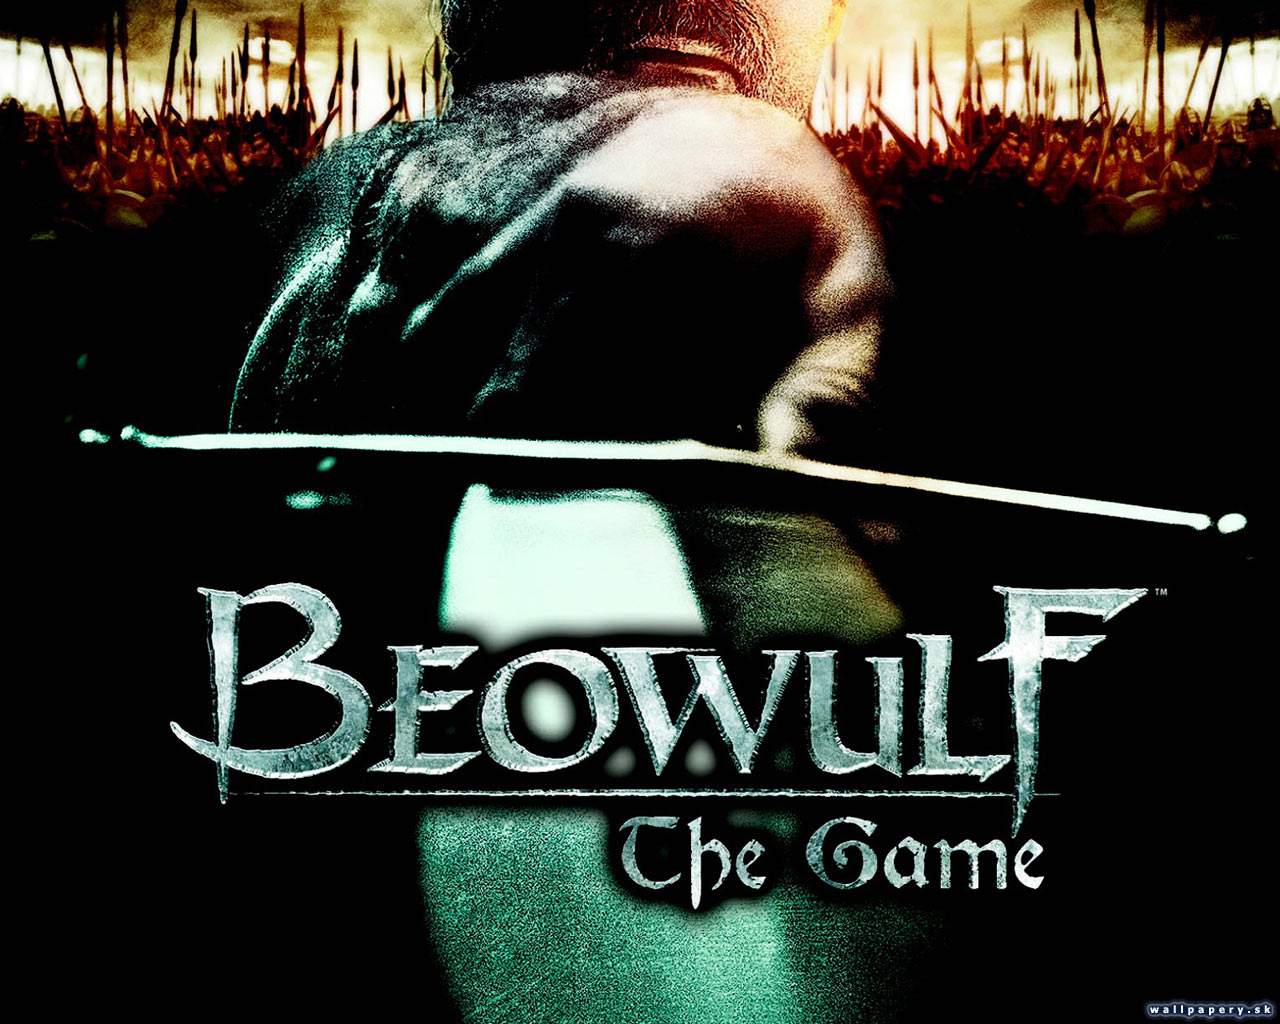 Beowulf: The Game - wallpaper 7